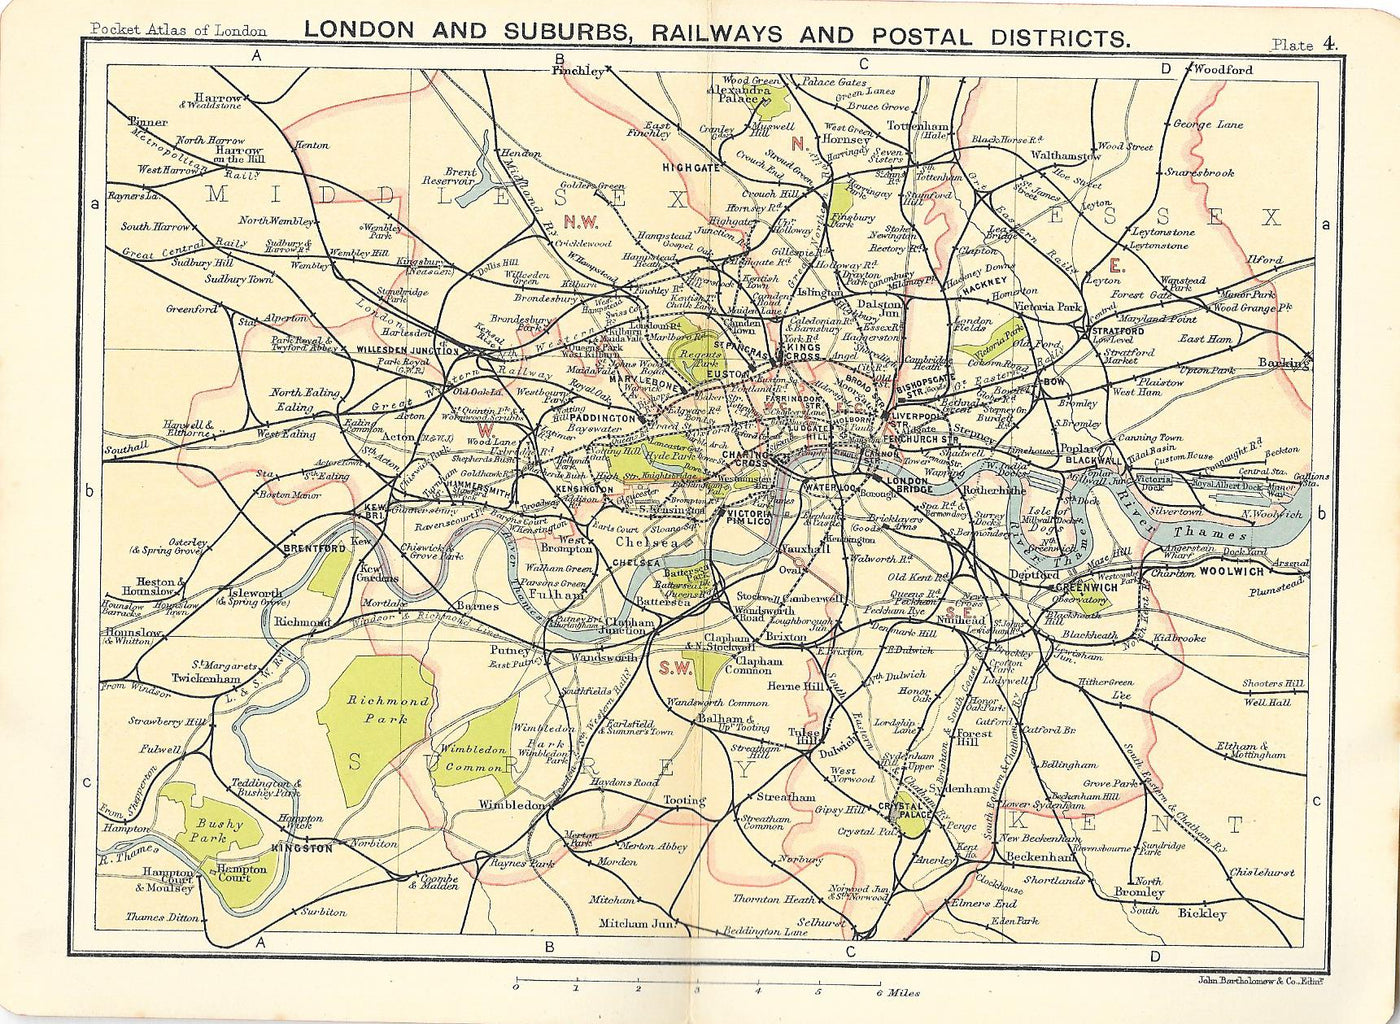 Railways and Postal Districts map of London Suburbs